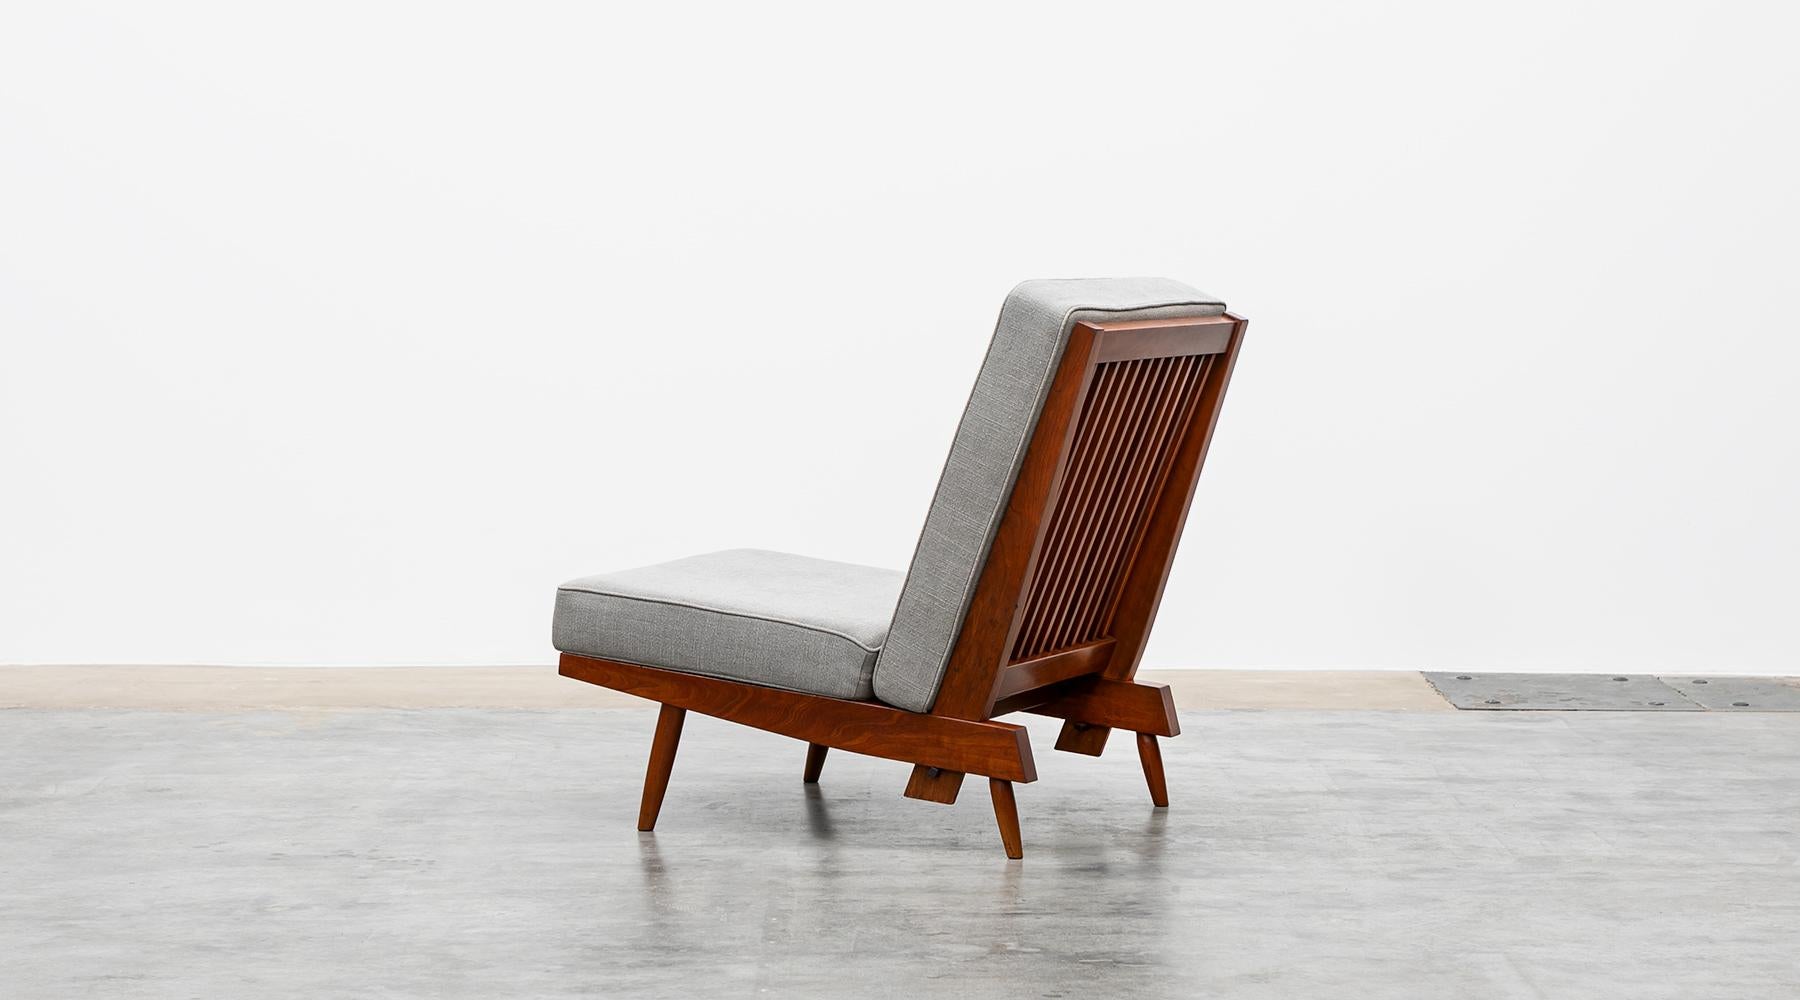 1960s Walnut, Grey Upholstery Lounge Chairs by George Nakashima 'd' For Sale 2